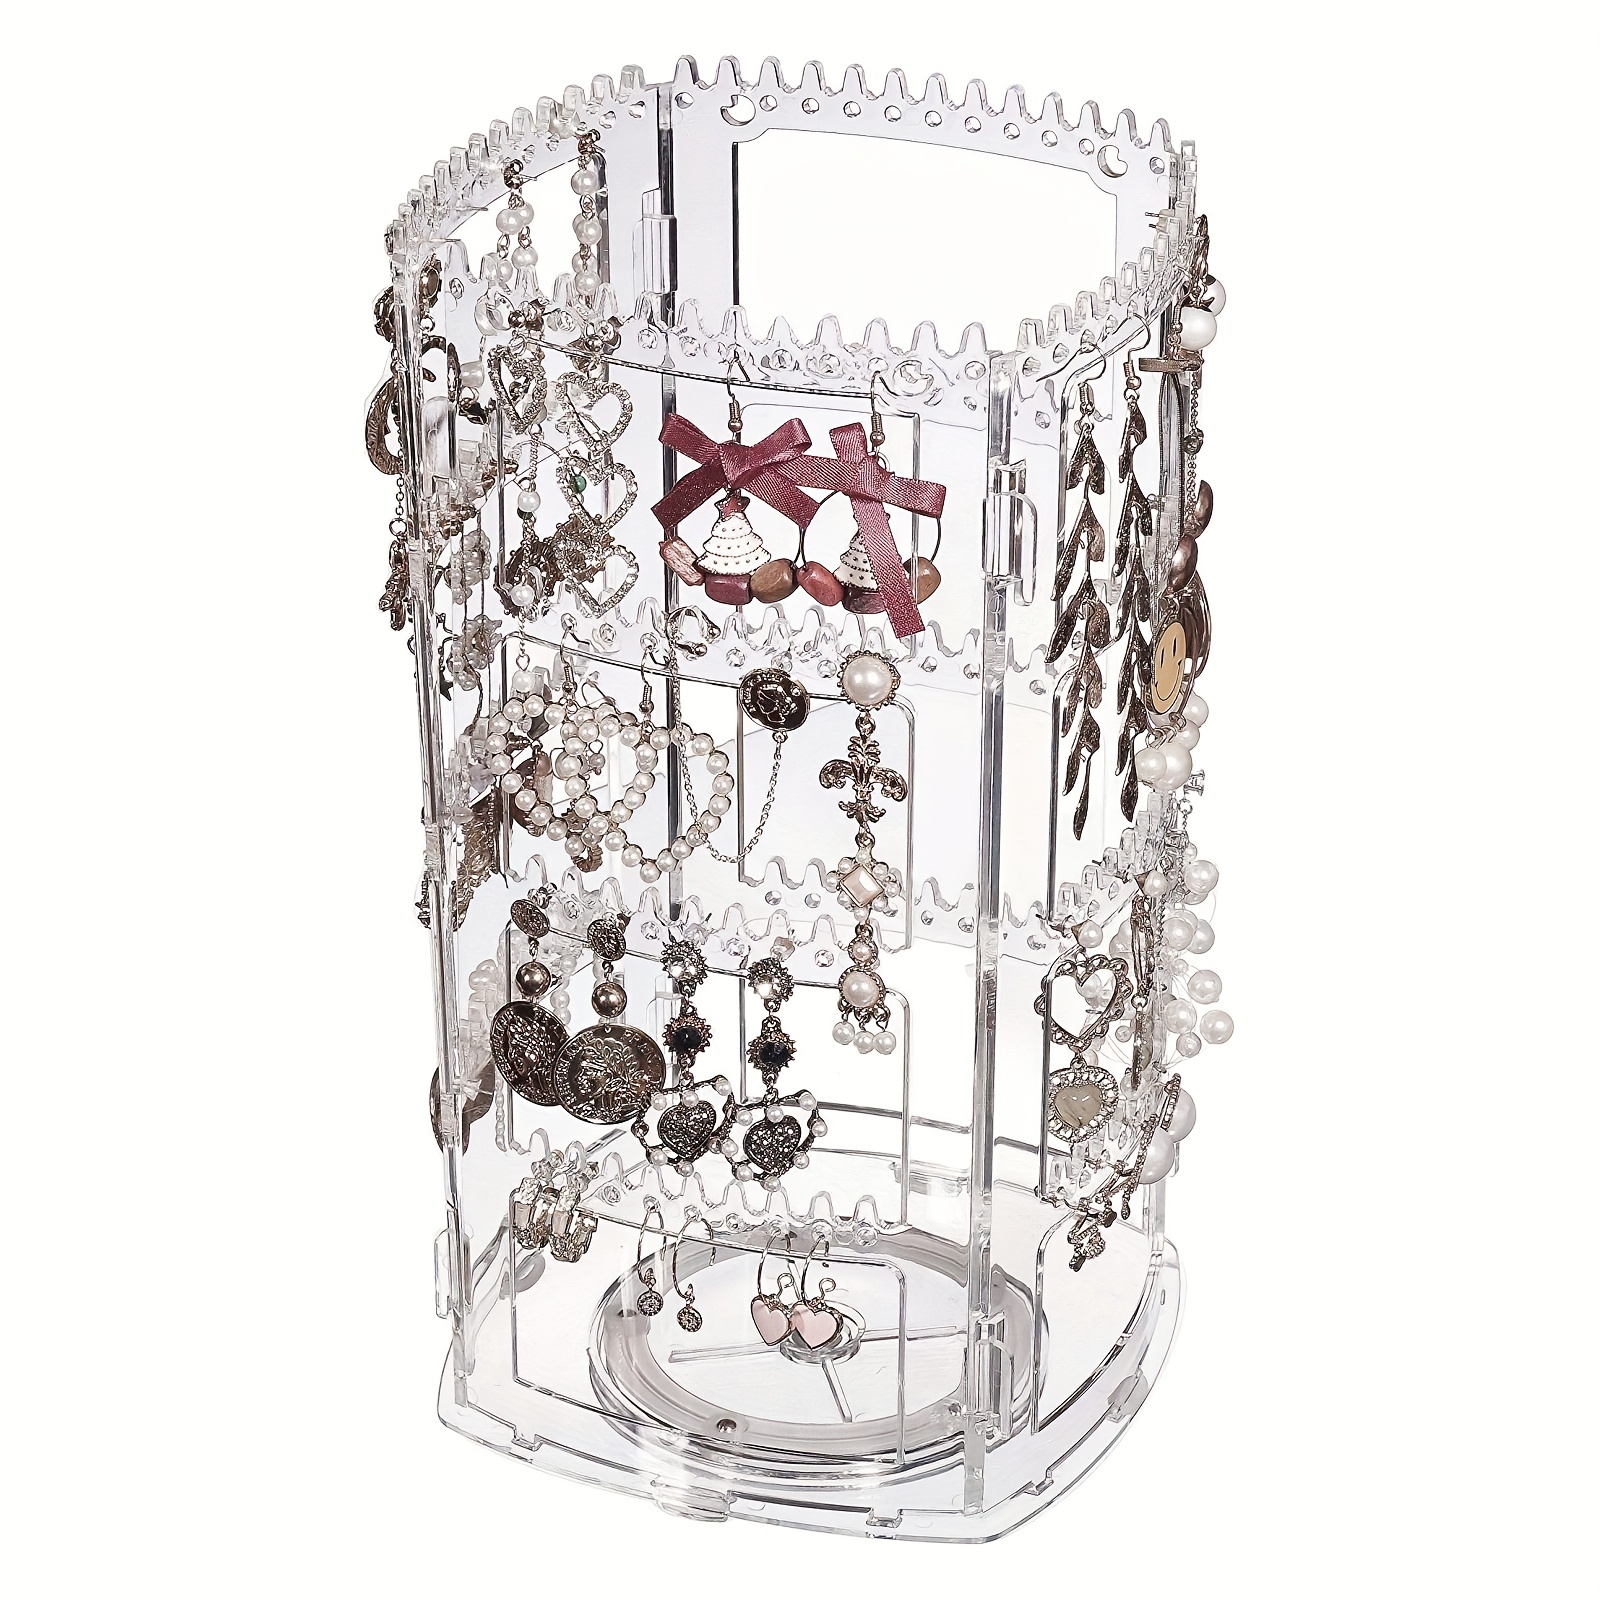 Wabjtam 360 Degree Acrylic Earring Holder, 4 Tier Jewelry Holder Organizer  Box Tree Display Stand For Earrings Bracelet Necklace